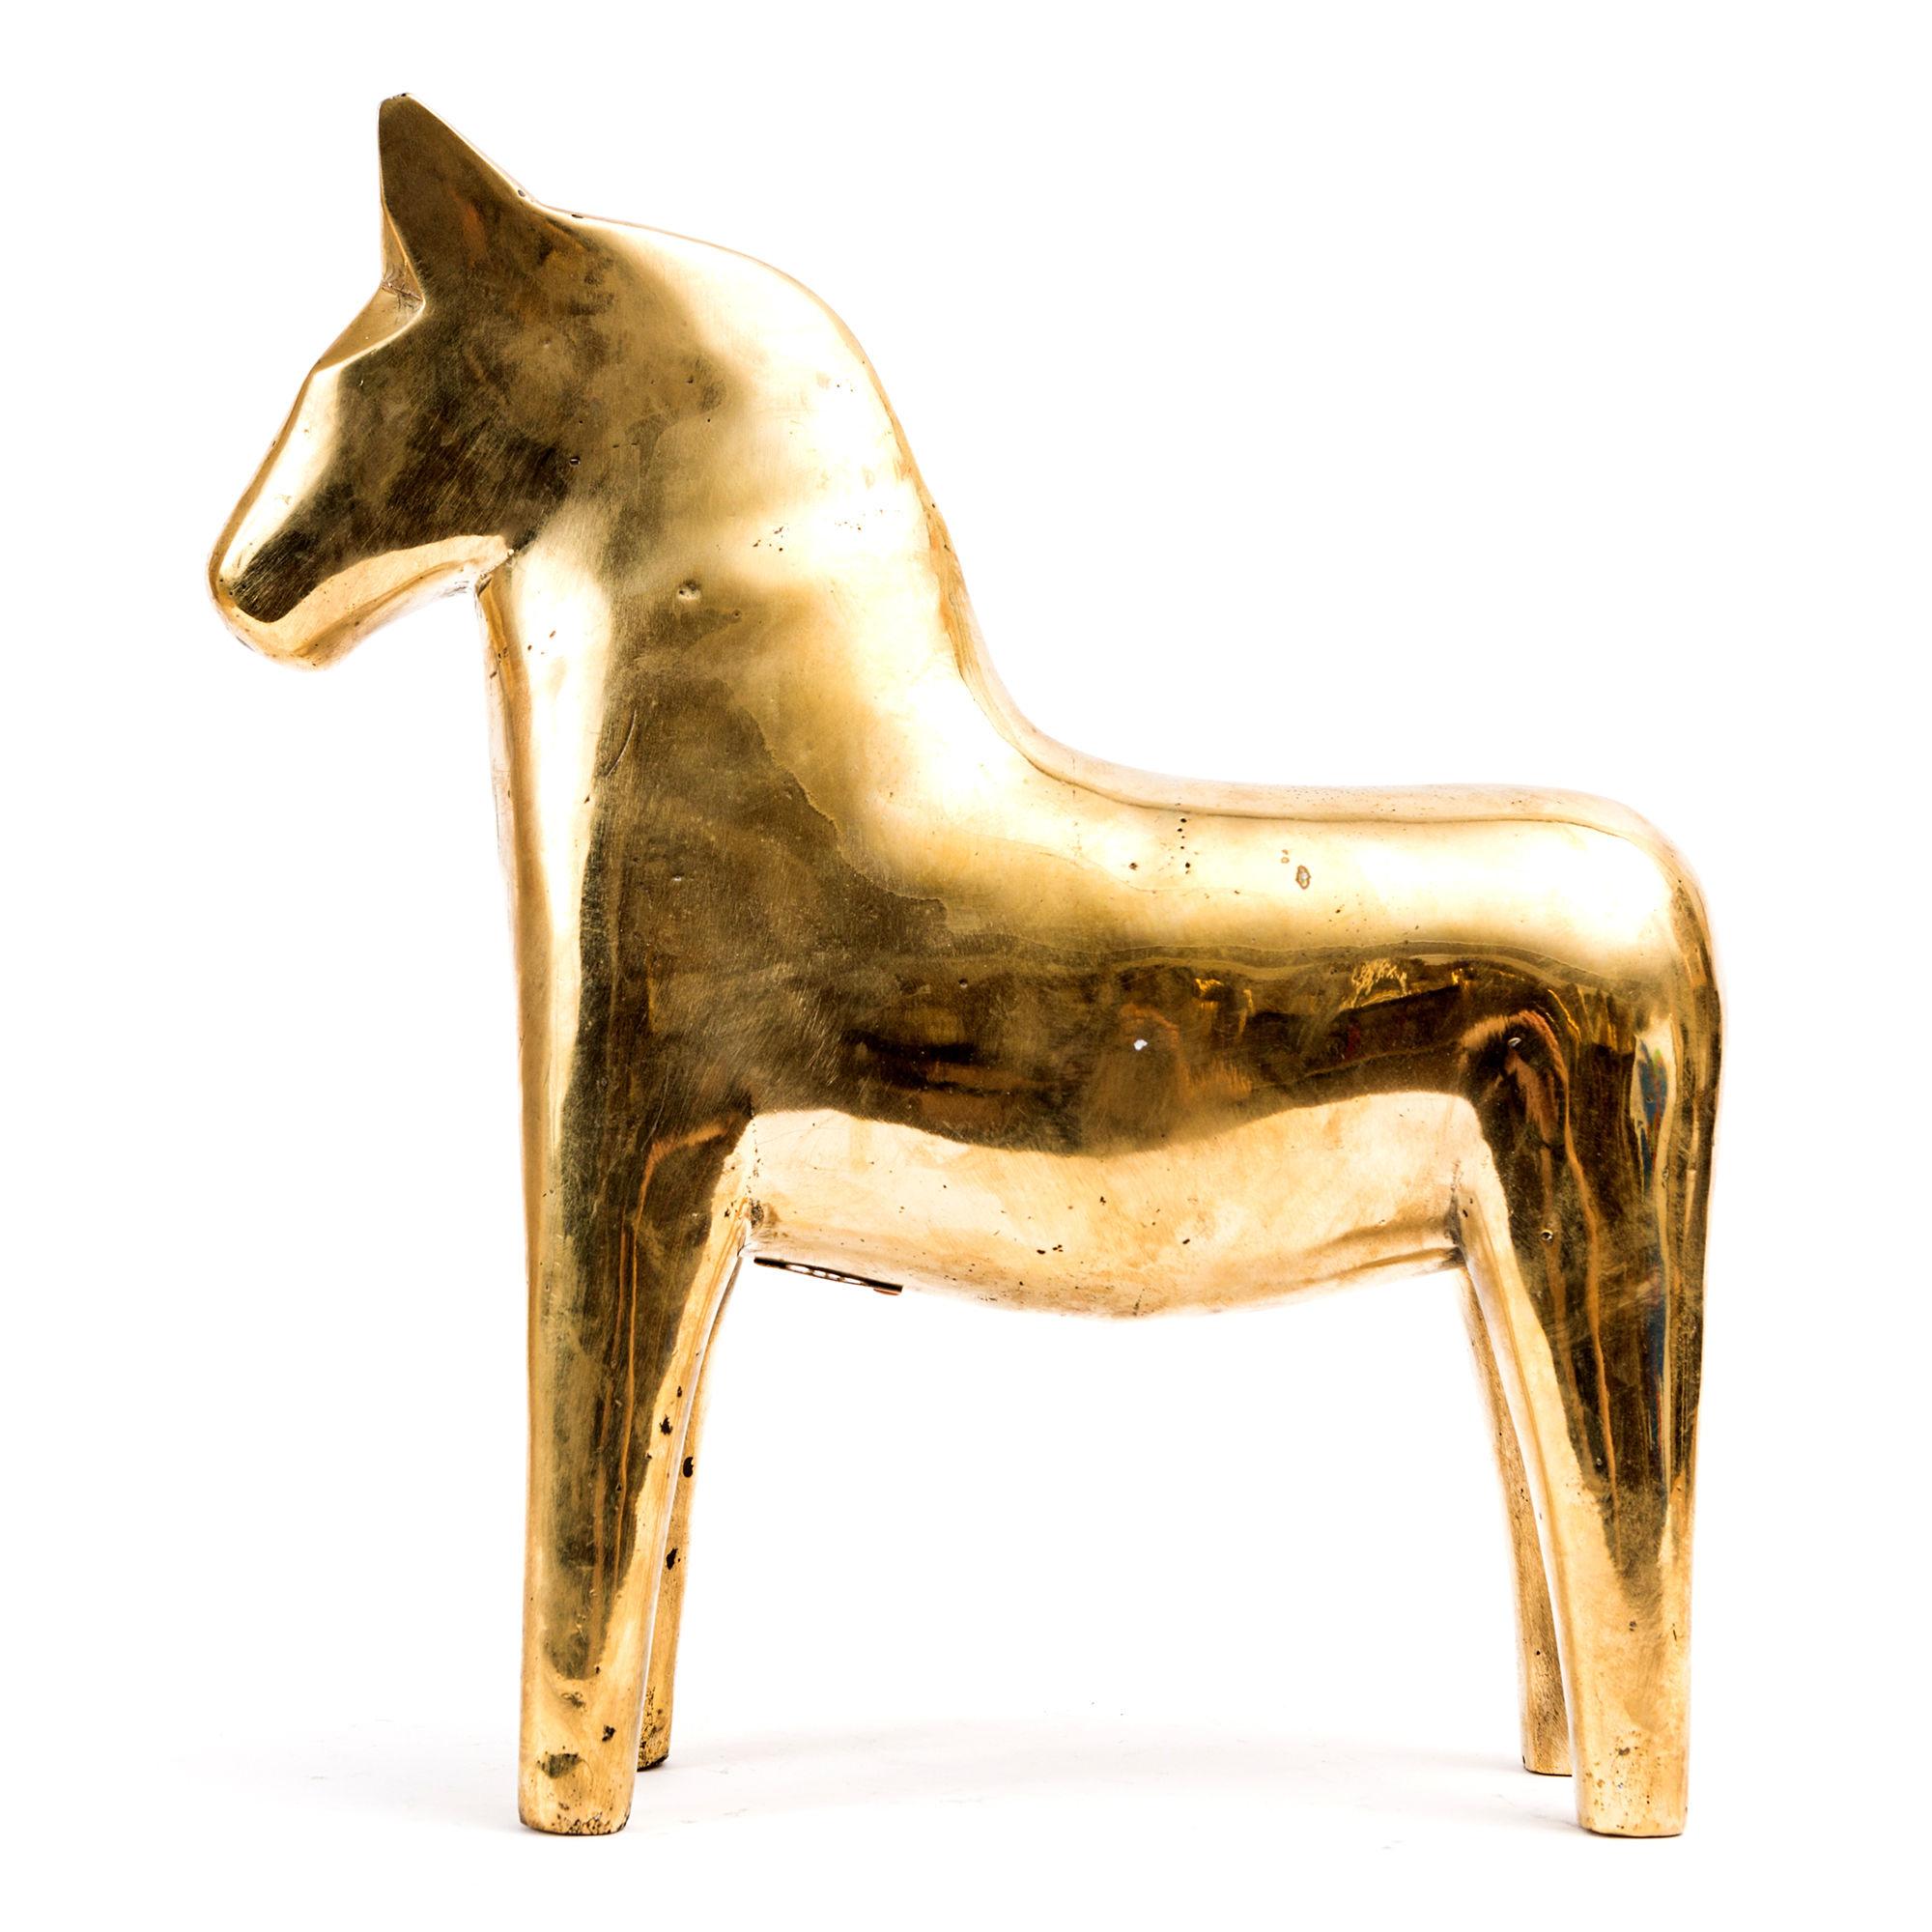 Horse sculpture in solid patinated bronze
Two are available 
N° 11/99 and N° 18/99
Measures: Length 31cm, height 34.5cm

Indicated price is per unit.
 